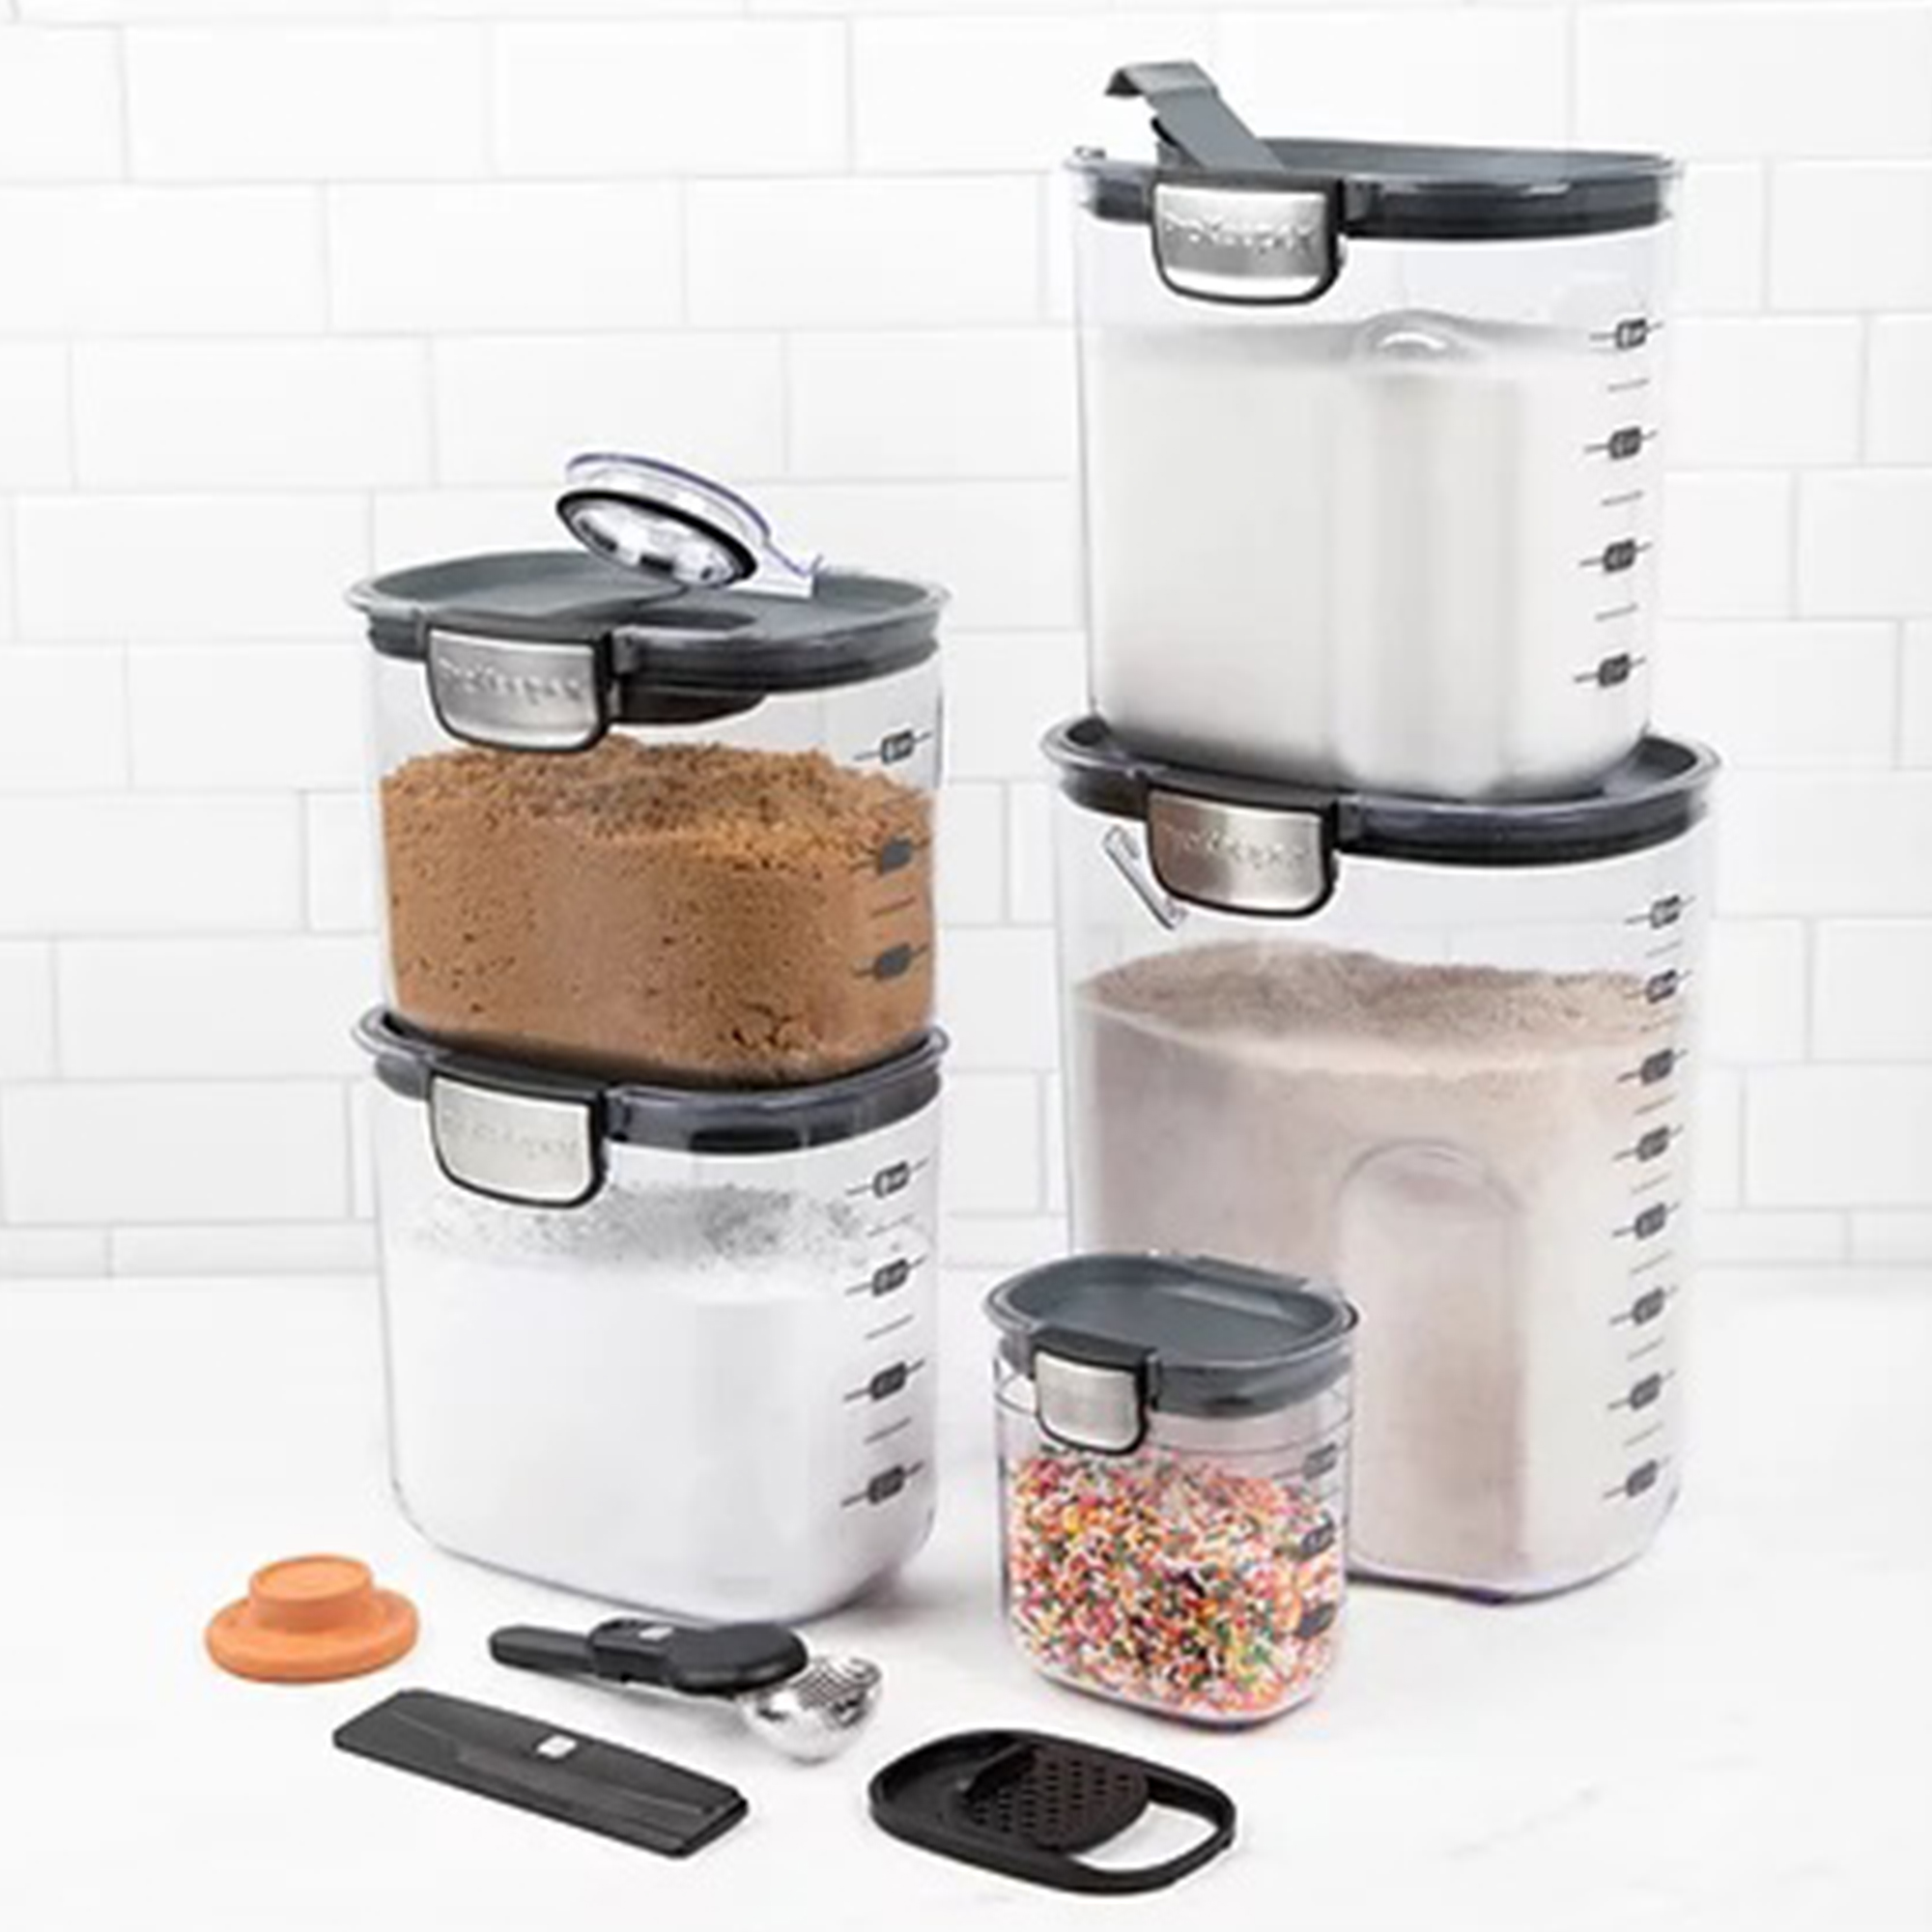 ProKeeper+ 9 Piece Clear Baker's Storage Container Set with Accessories - image 2 of 9